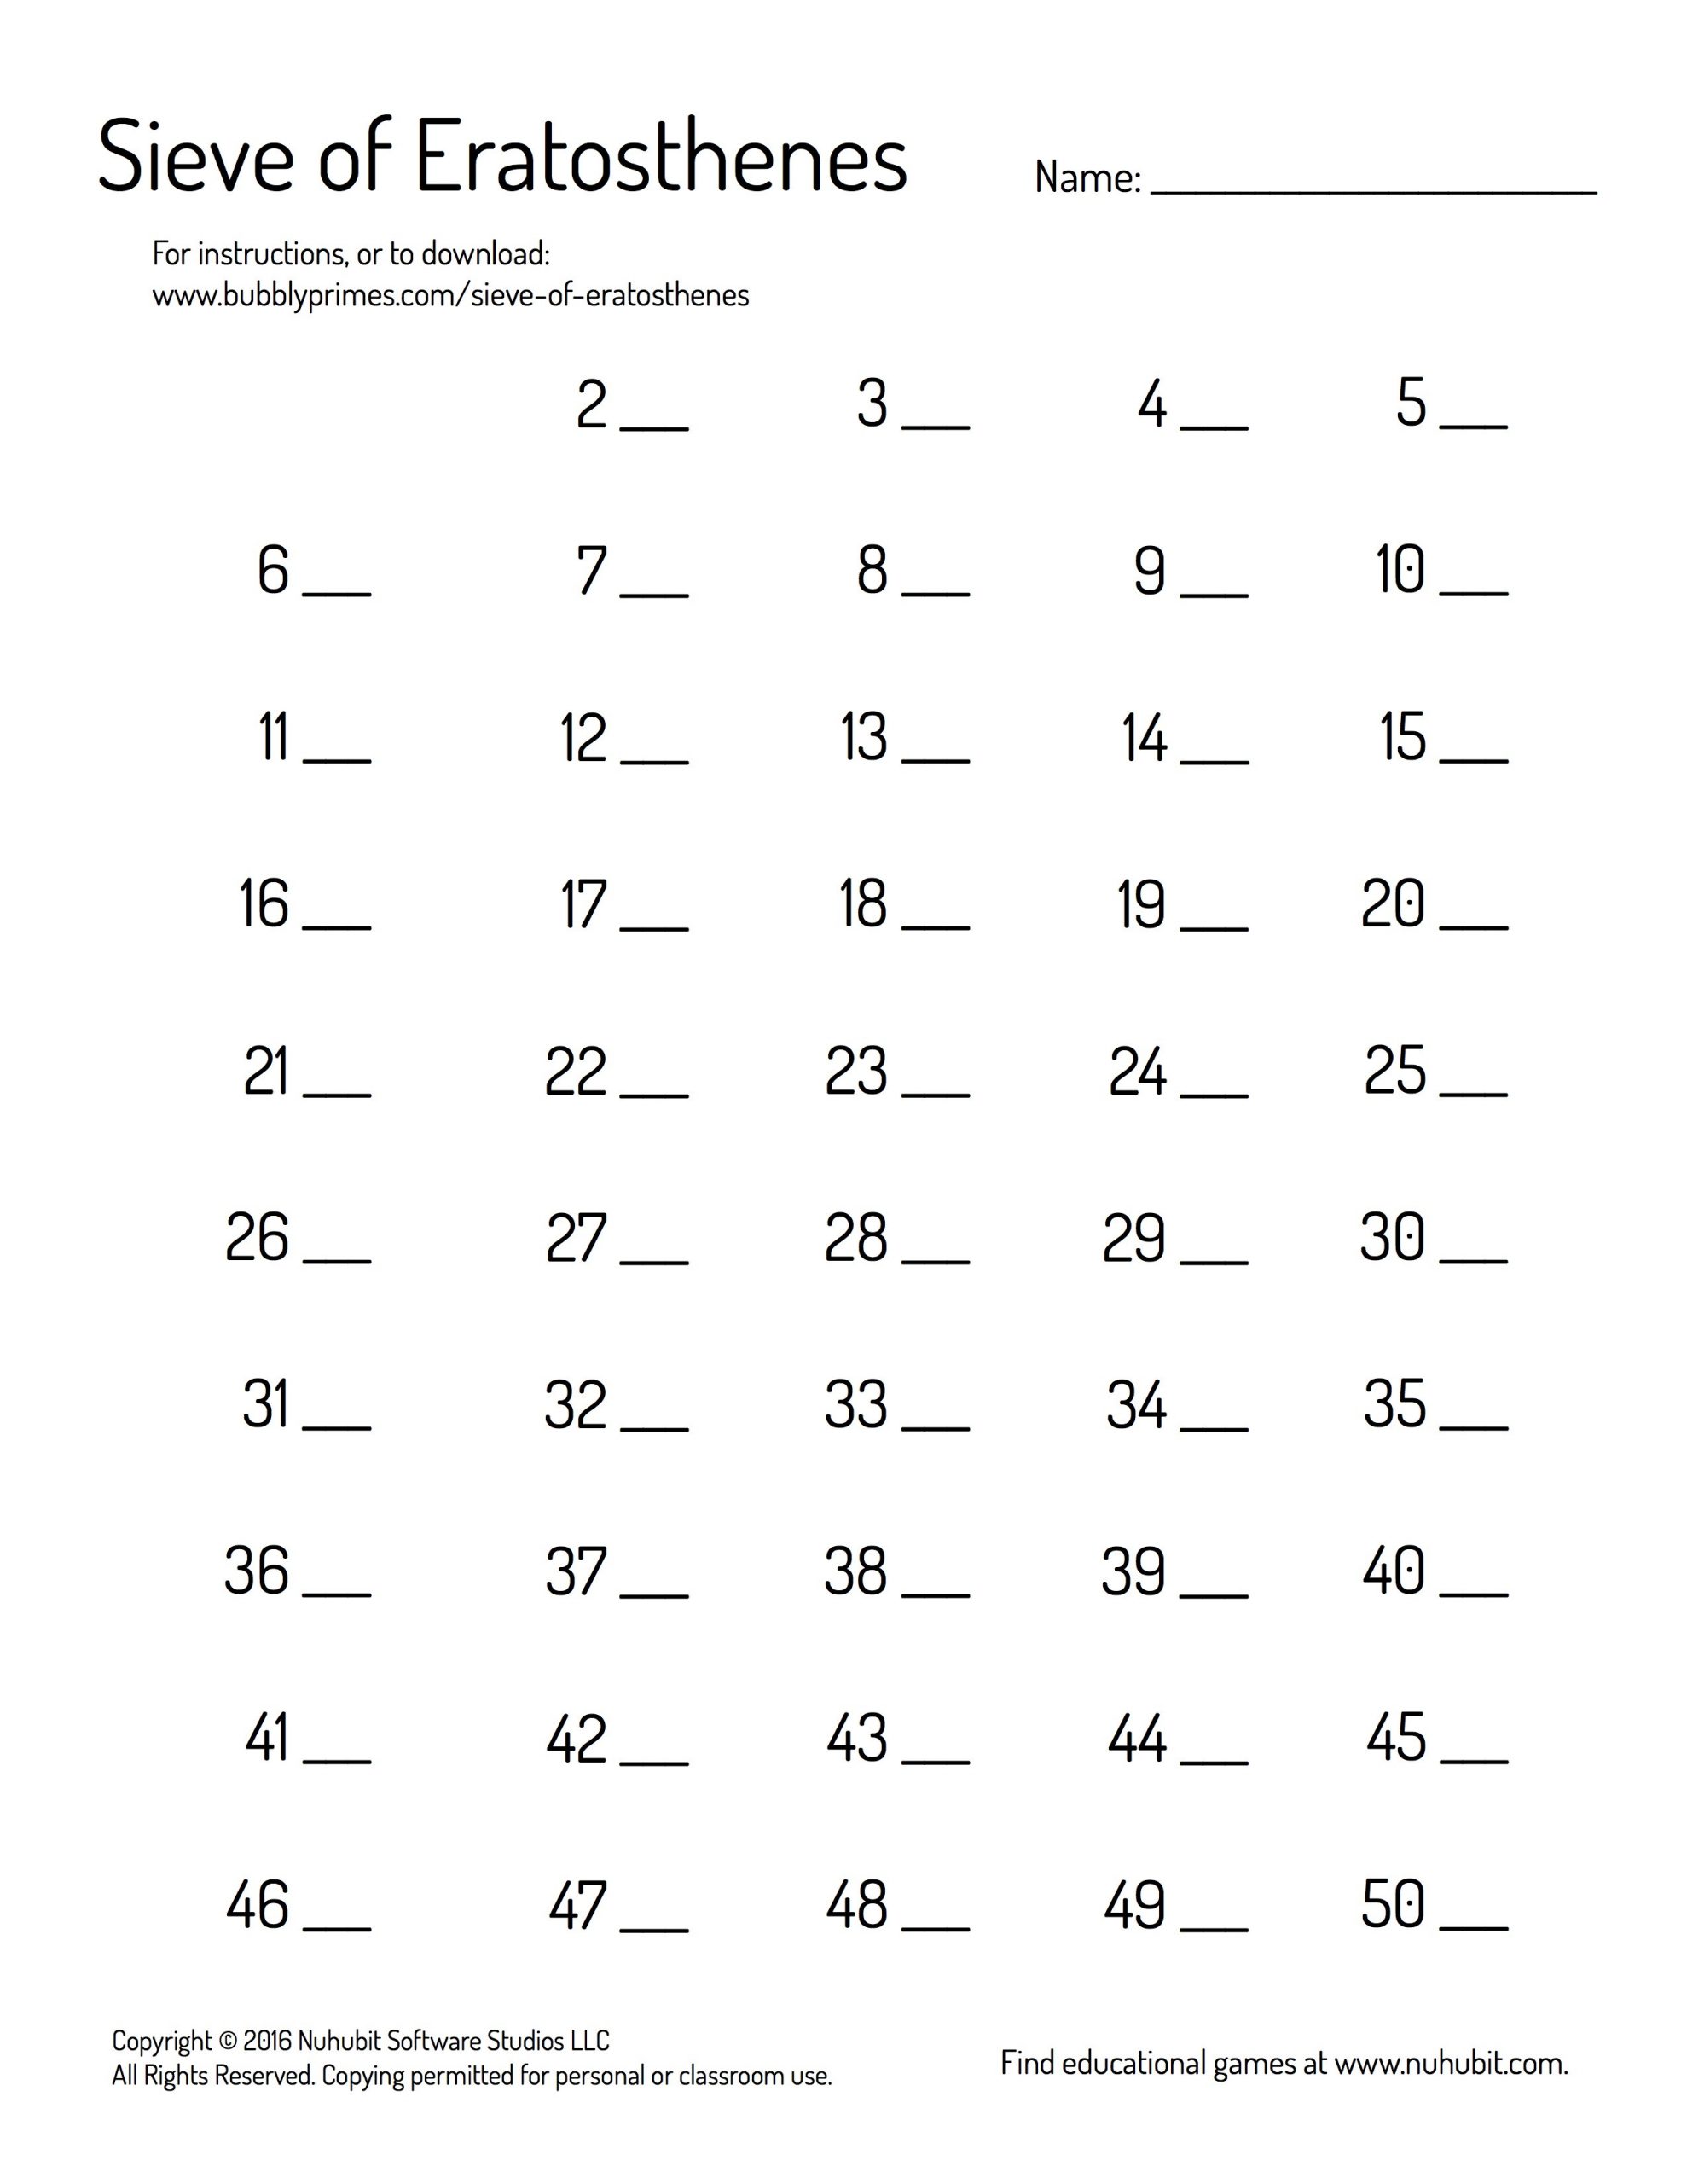 Prime Factorization Worksheet Pdf About the Bubbly Primes Math Help Pages Bubbly Primes